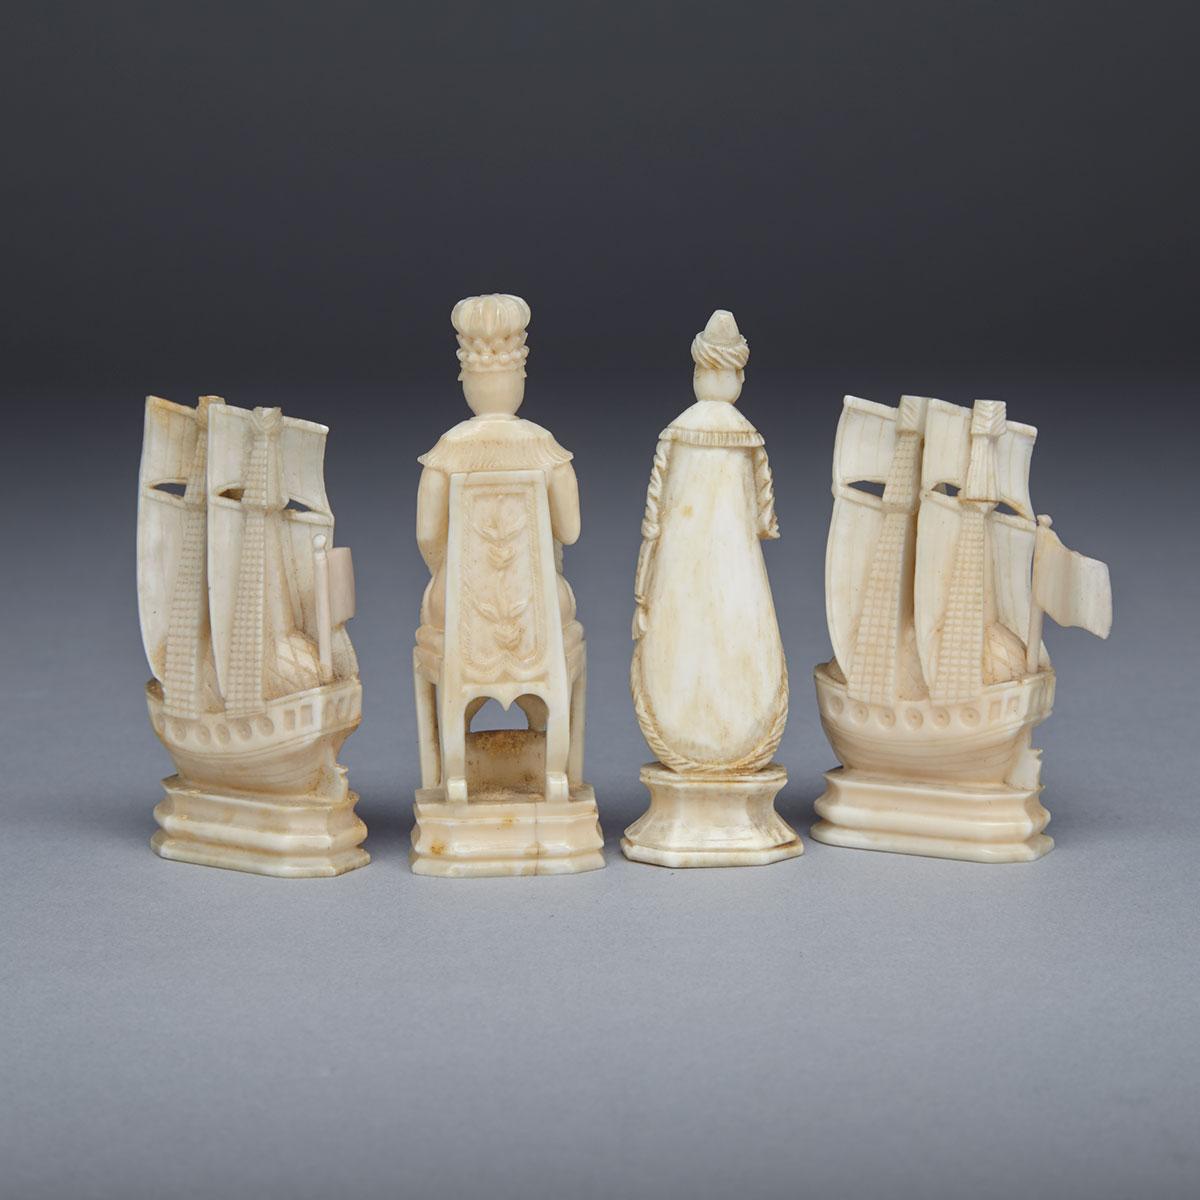 Russian Carved Walrus Ivory Figural Chess Set, KHOLMOGORY 19th century